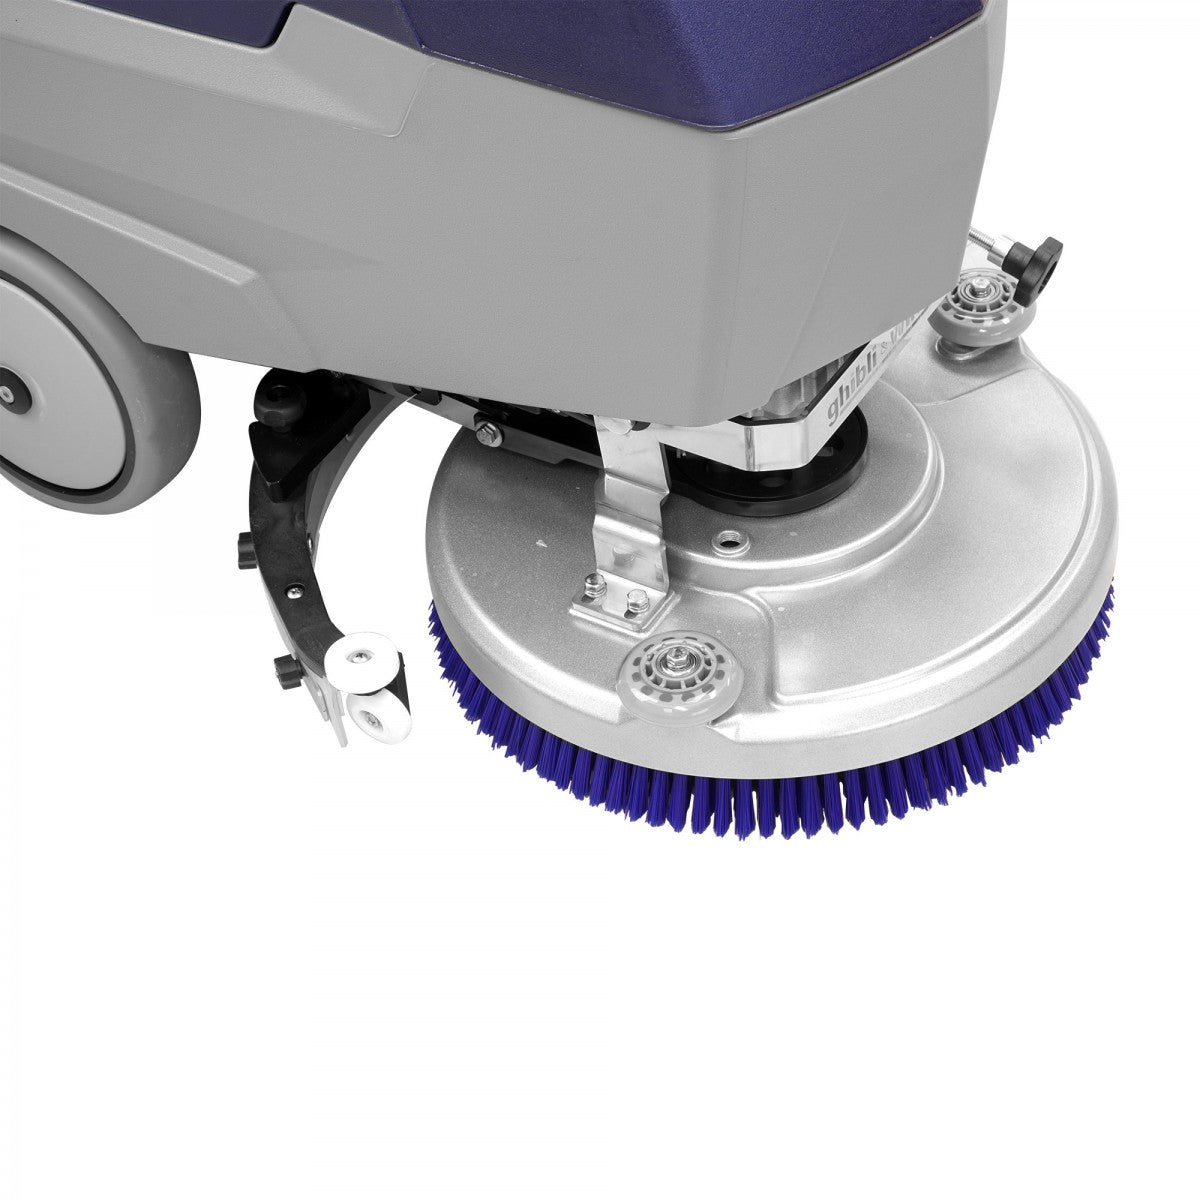 Johnny Vac / Ghibli GHM Autoscrubber With 15’ Cleaning Path - Ride - On & Scrubbers